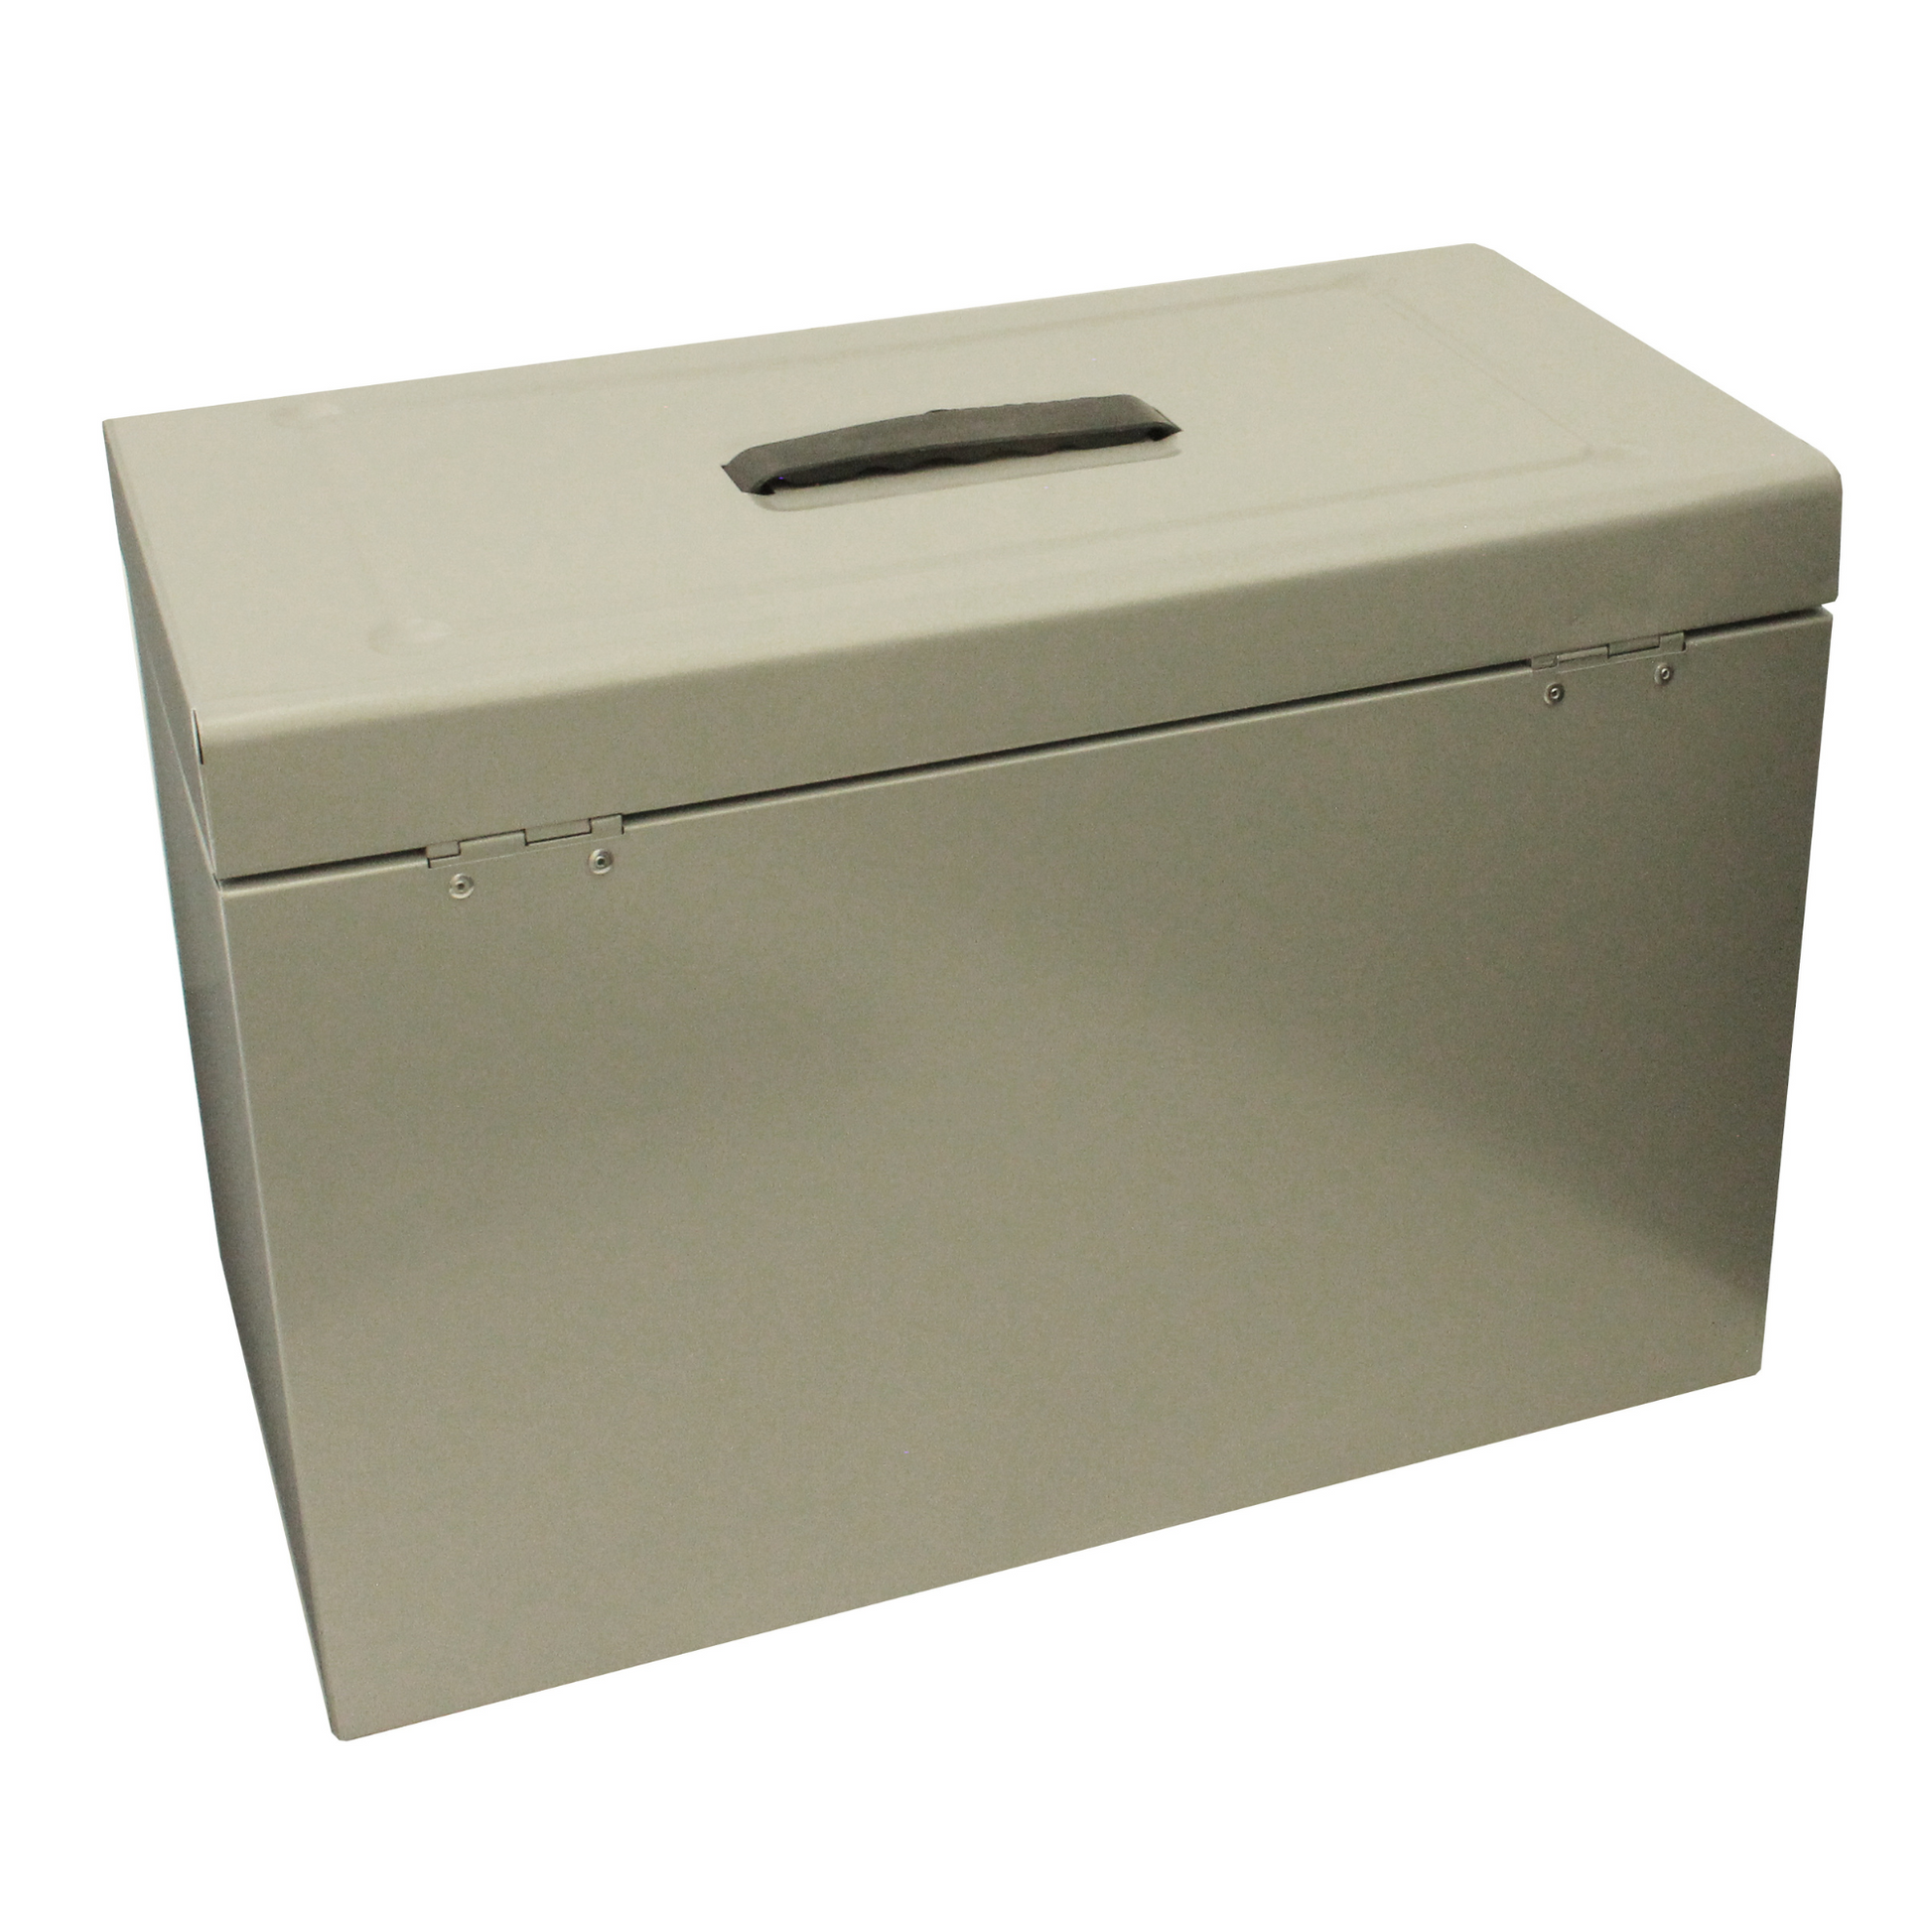 A silver grey A4+ (Foolscap) steel home file box showing rear, with sturdy riveted hinges and carrying handle on top in view.